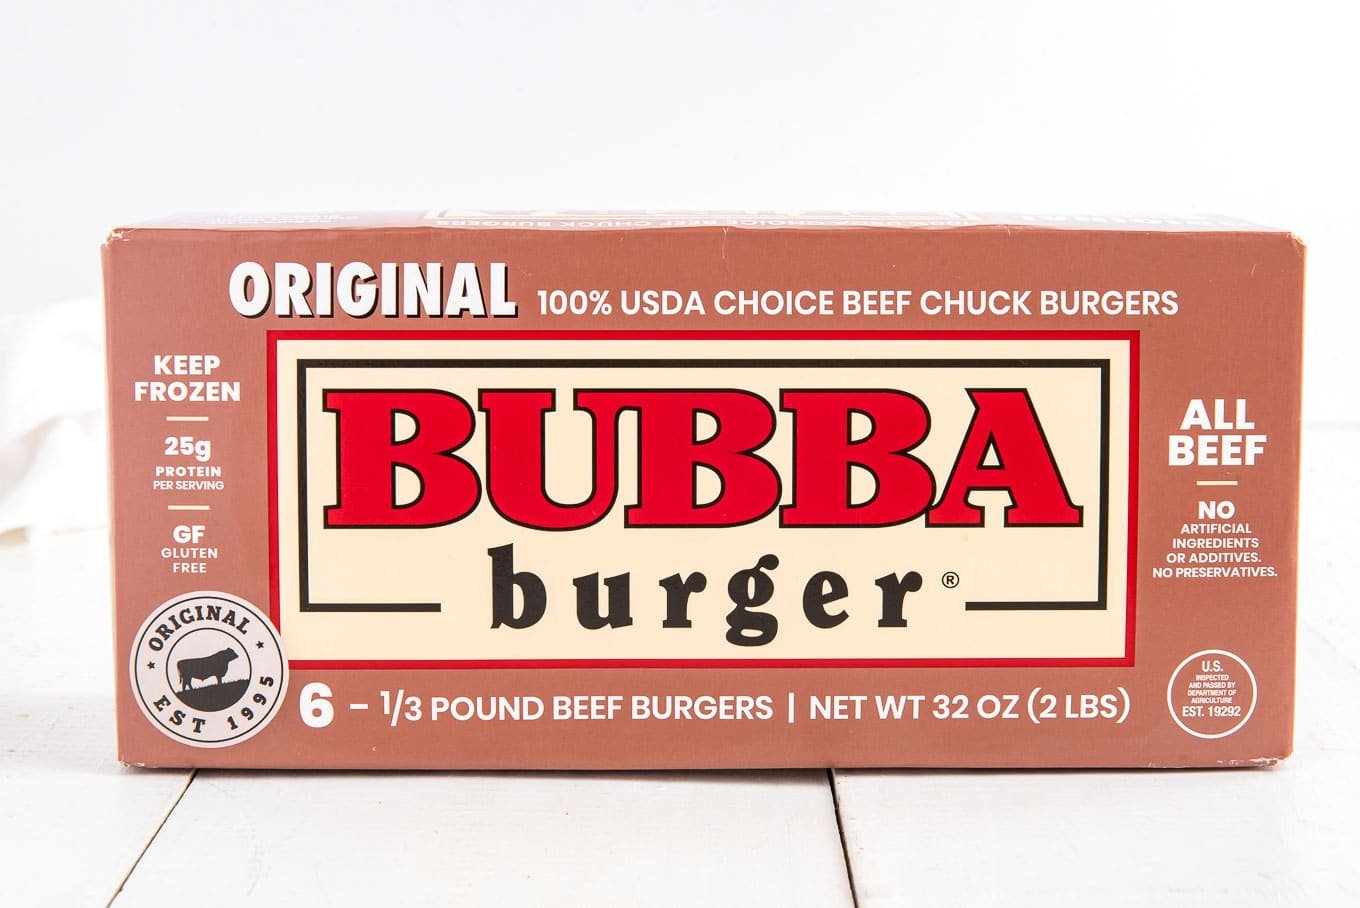 A box of Bubba burgers on the countertop.